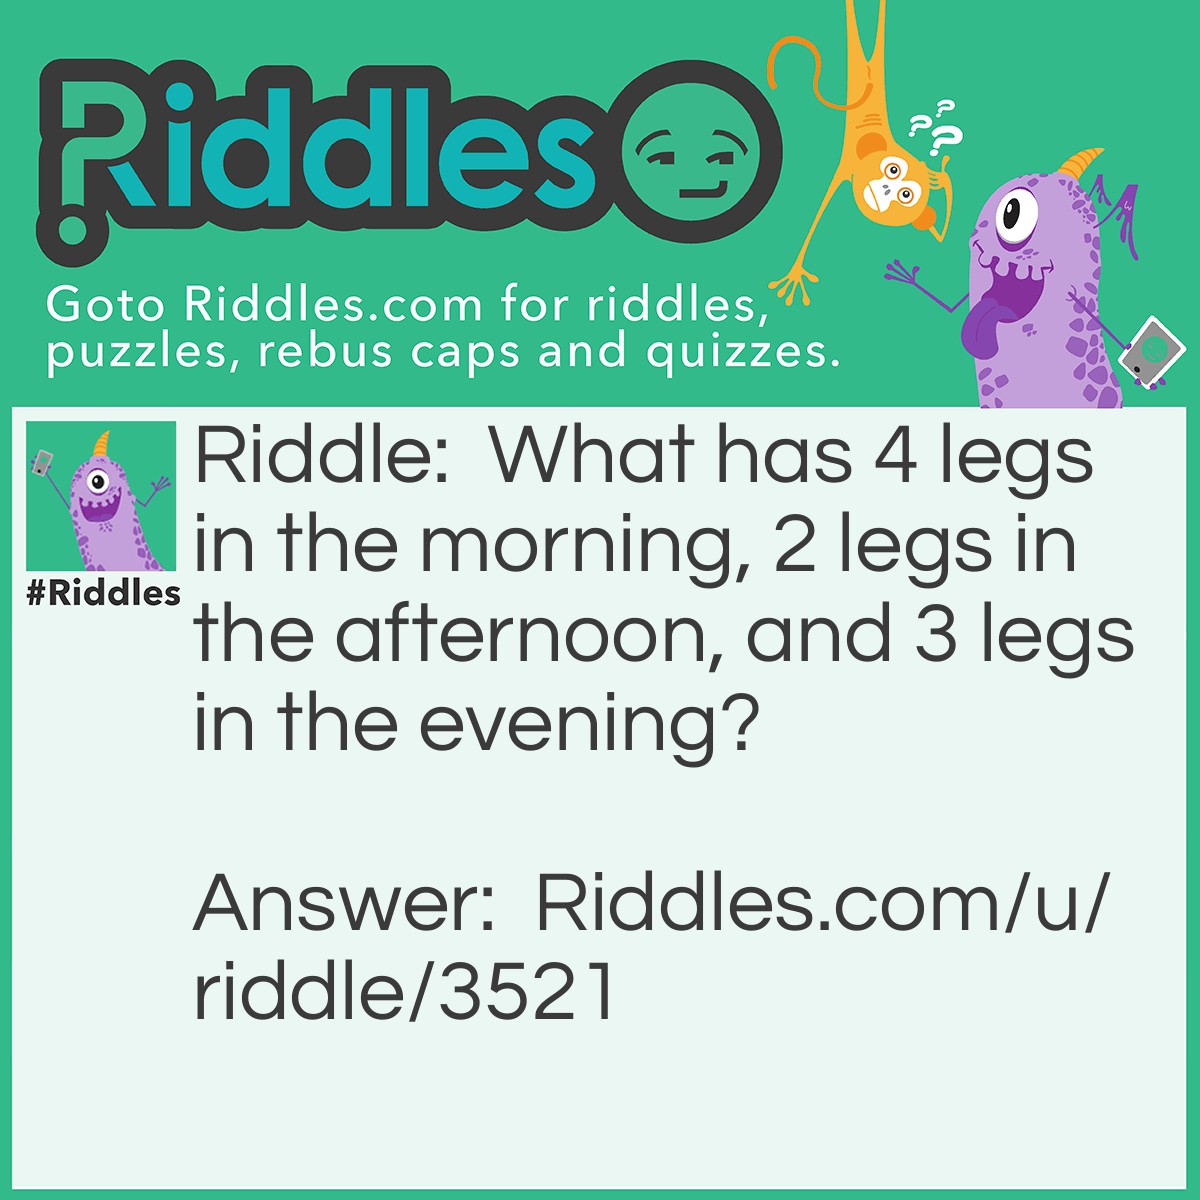 Riddle: What has 4 legs in the morning, 2 legs in the afternoon, and 3 legs in the evening? Answer: A man.